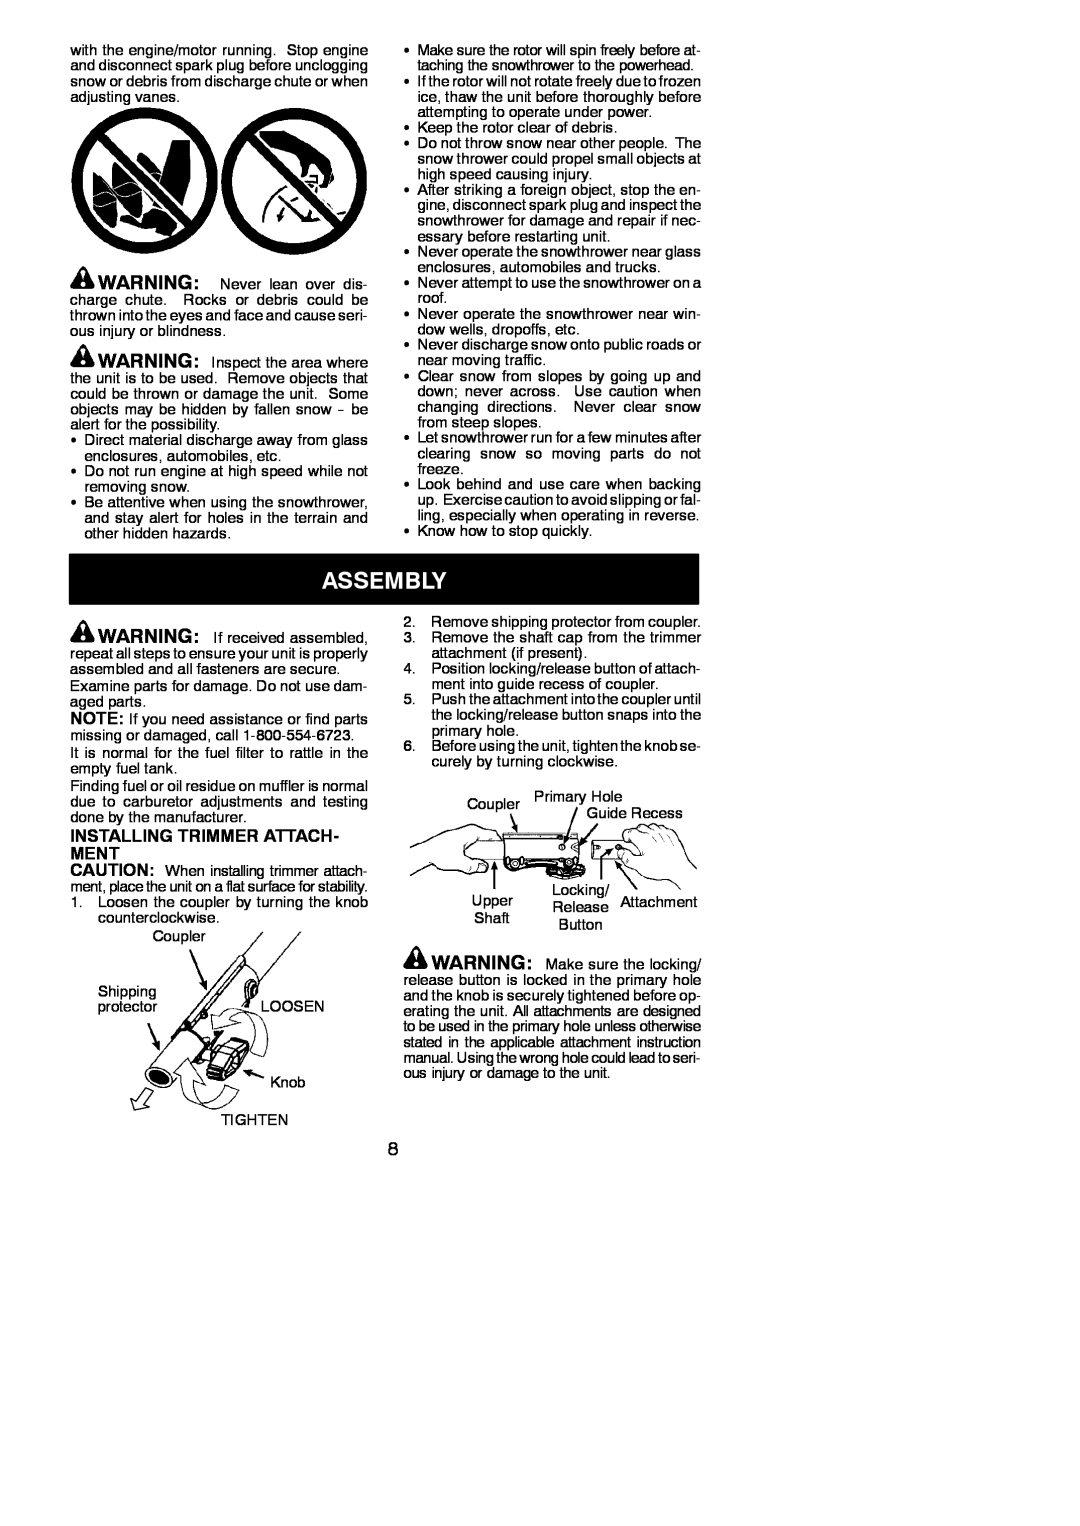 Poulan 952711878, 115270226 instruction manual Assembly, Installing Trimmer Attach- Ment 